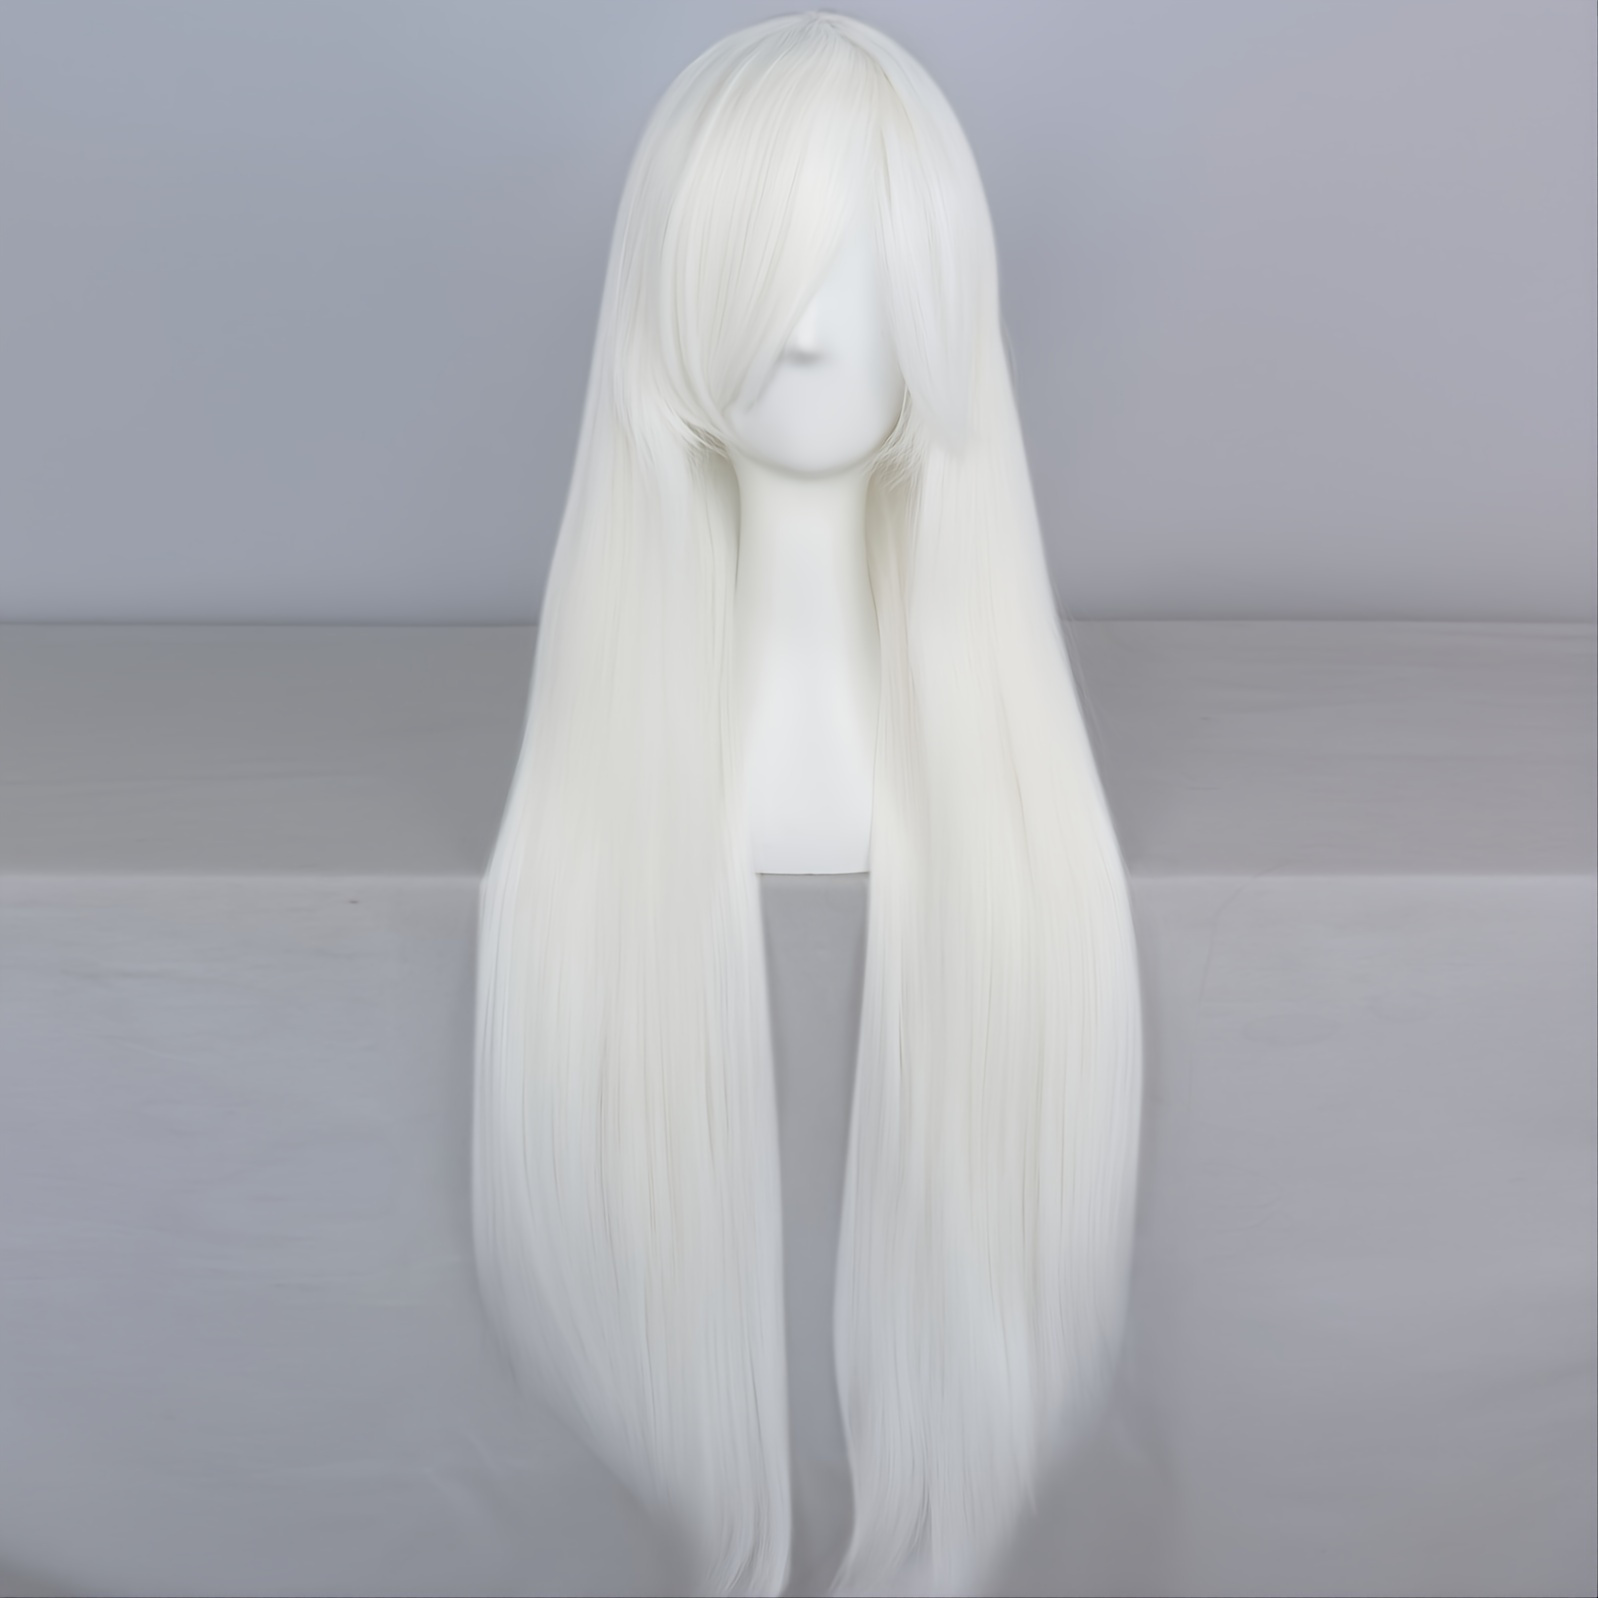 Chelsea Smith Wigs | What to Look for in a Quality White Wig